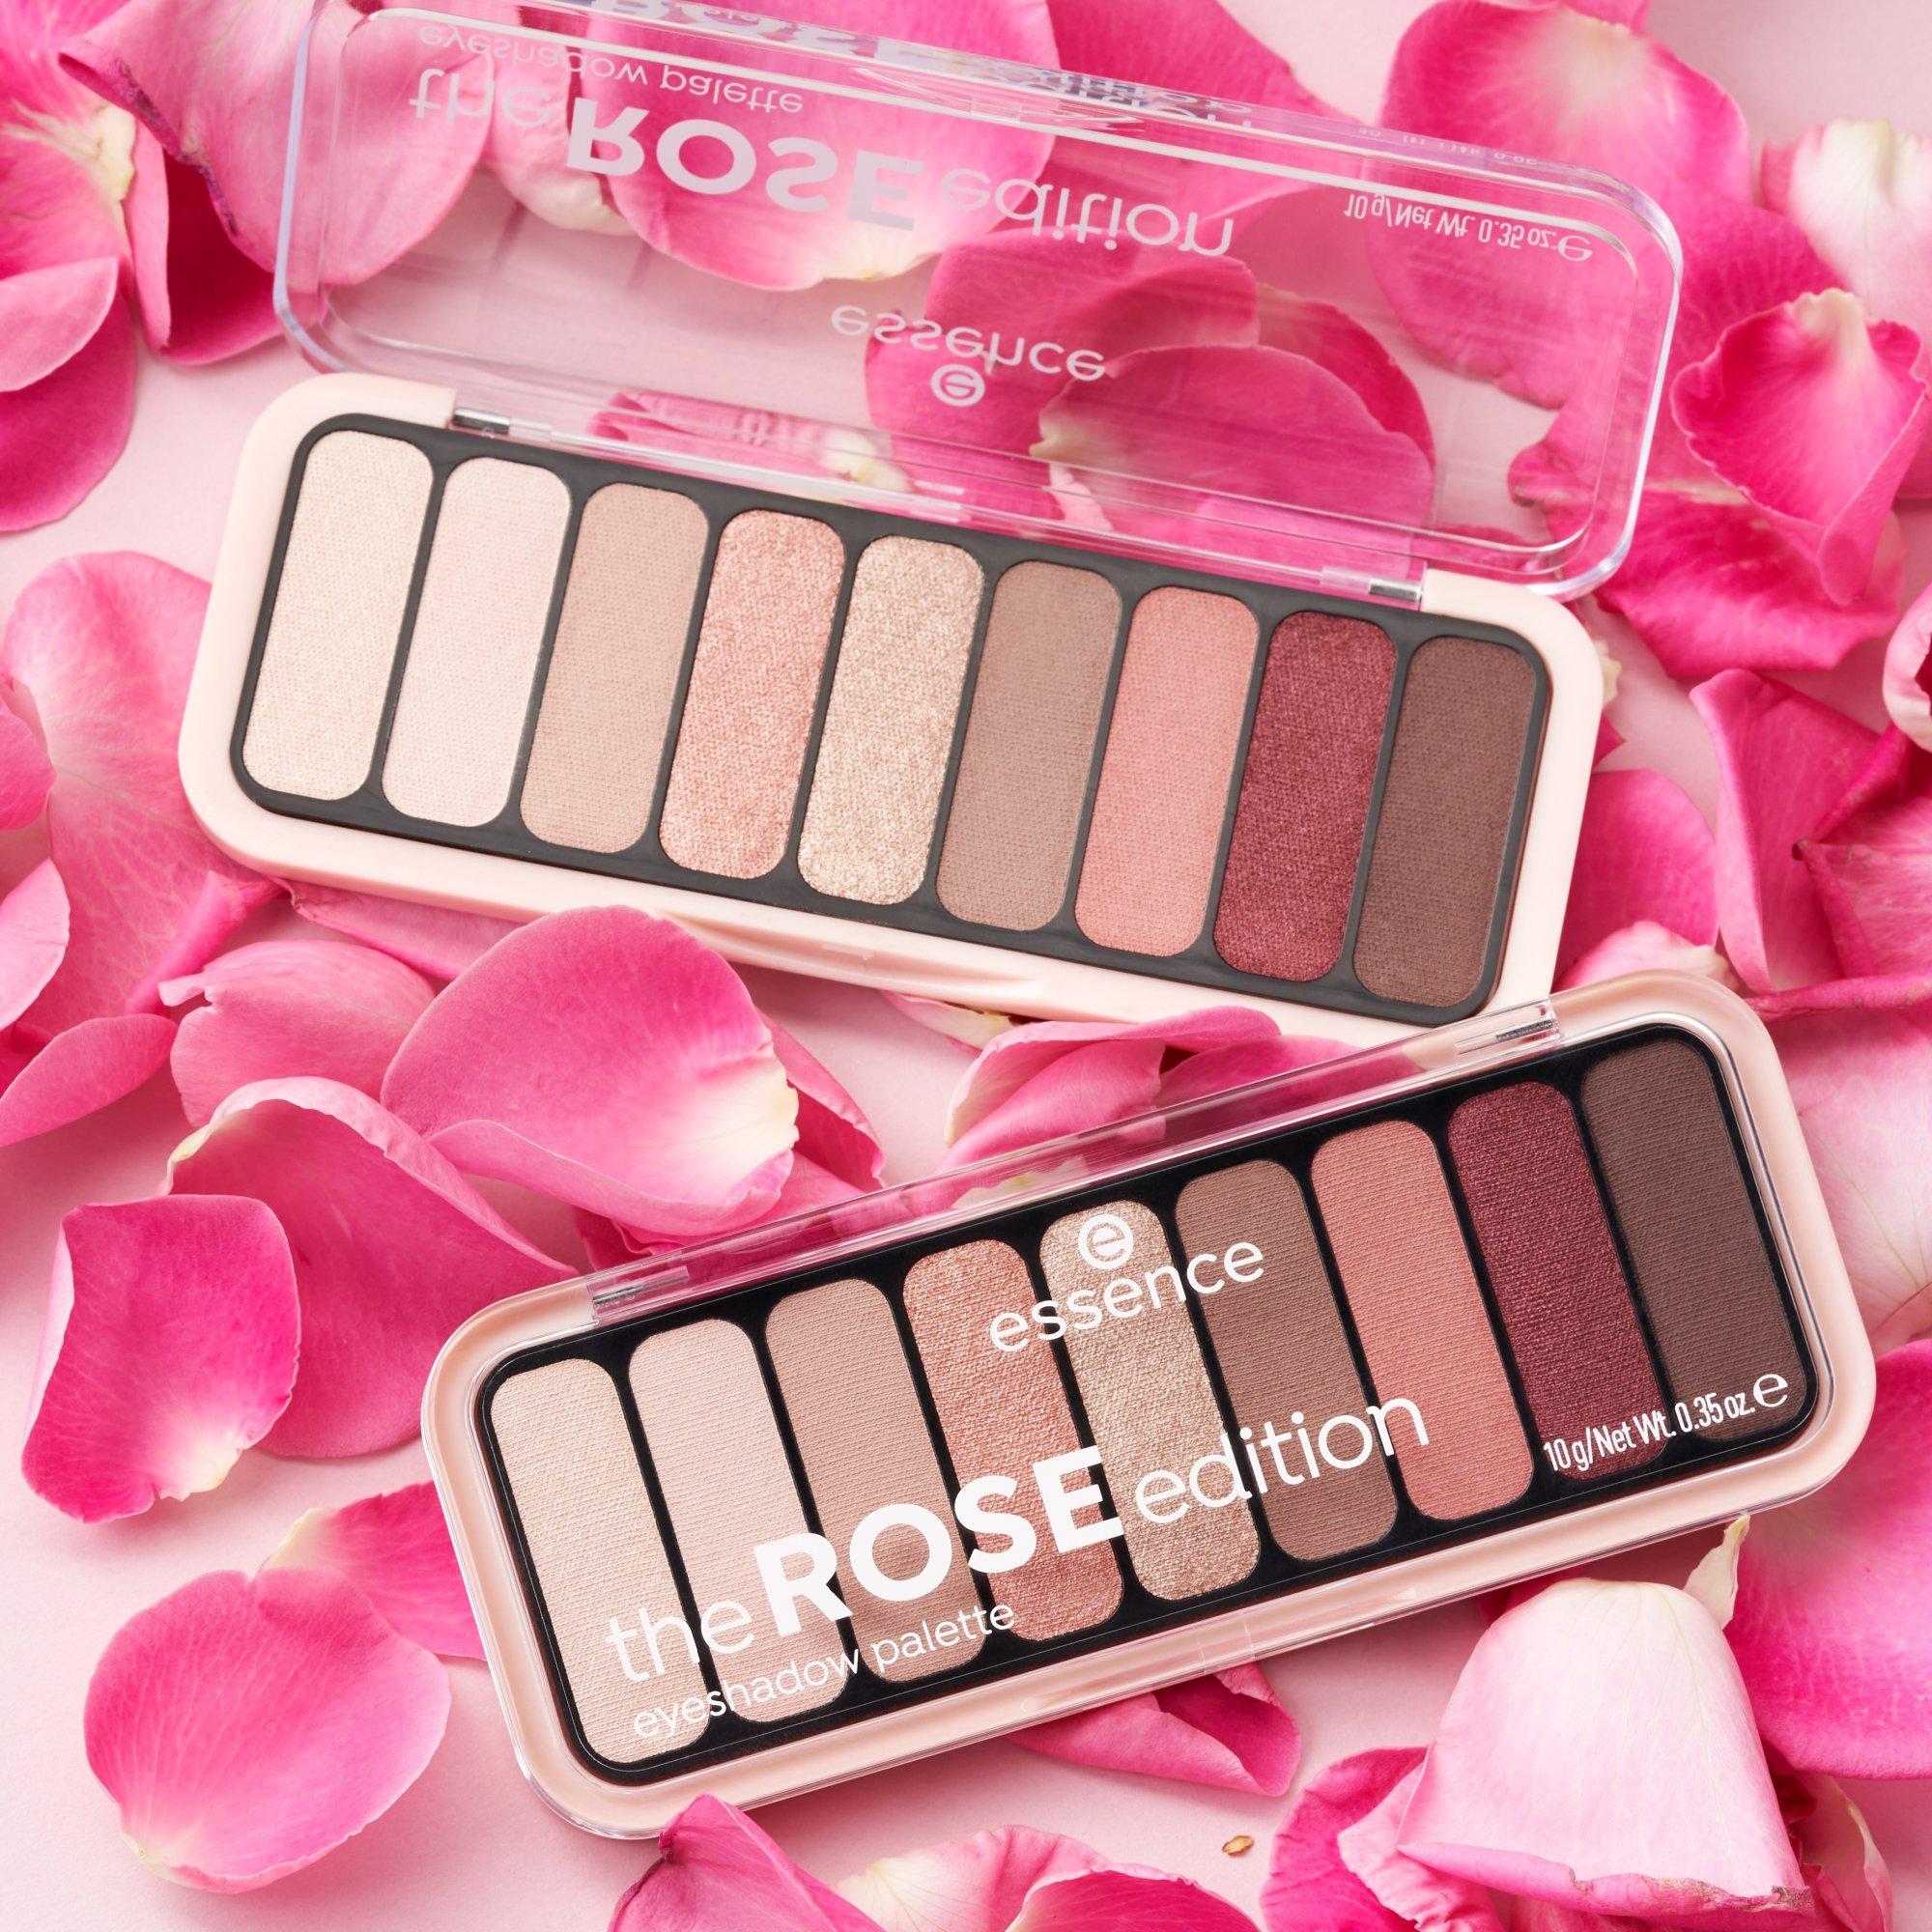 the ROSE edition eyeshadow palette